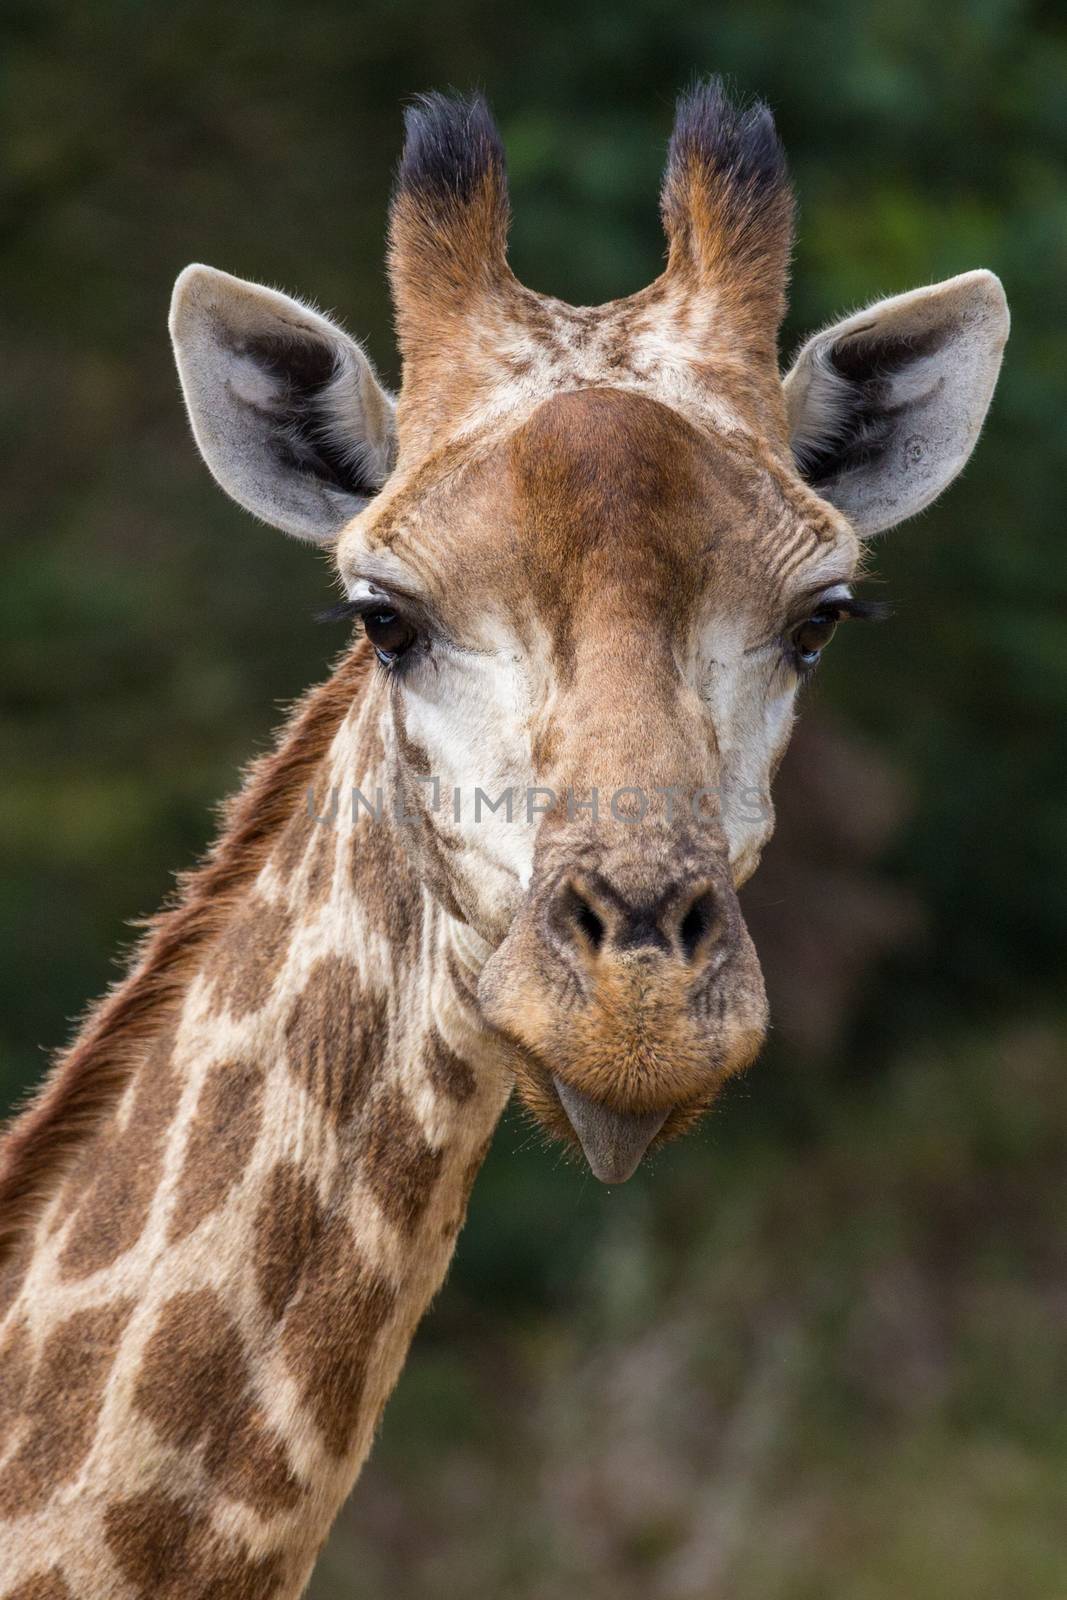 Portrait of a giraffe with funny expression and tongue sticking out